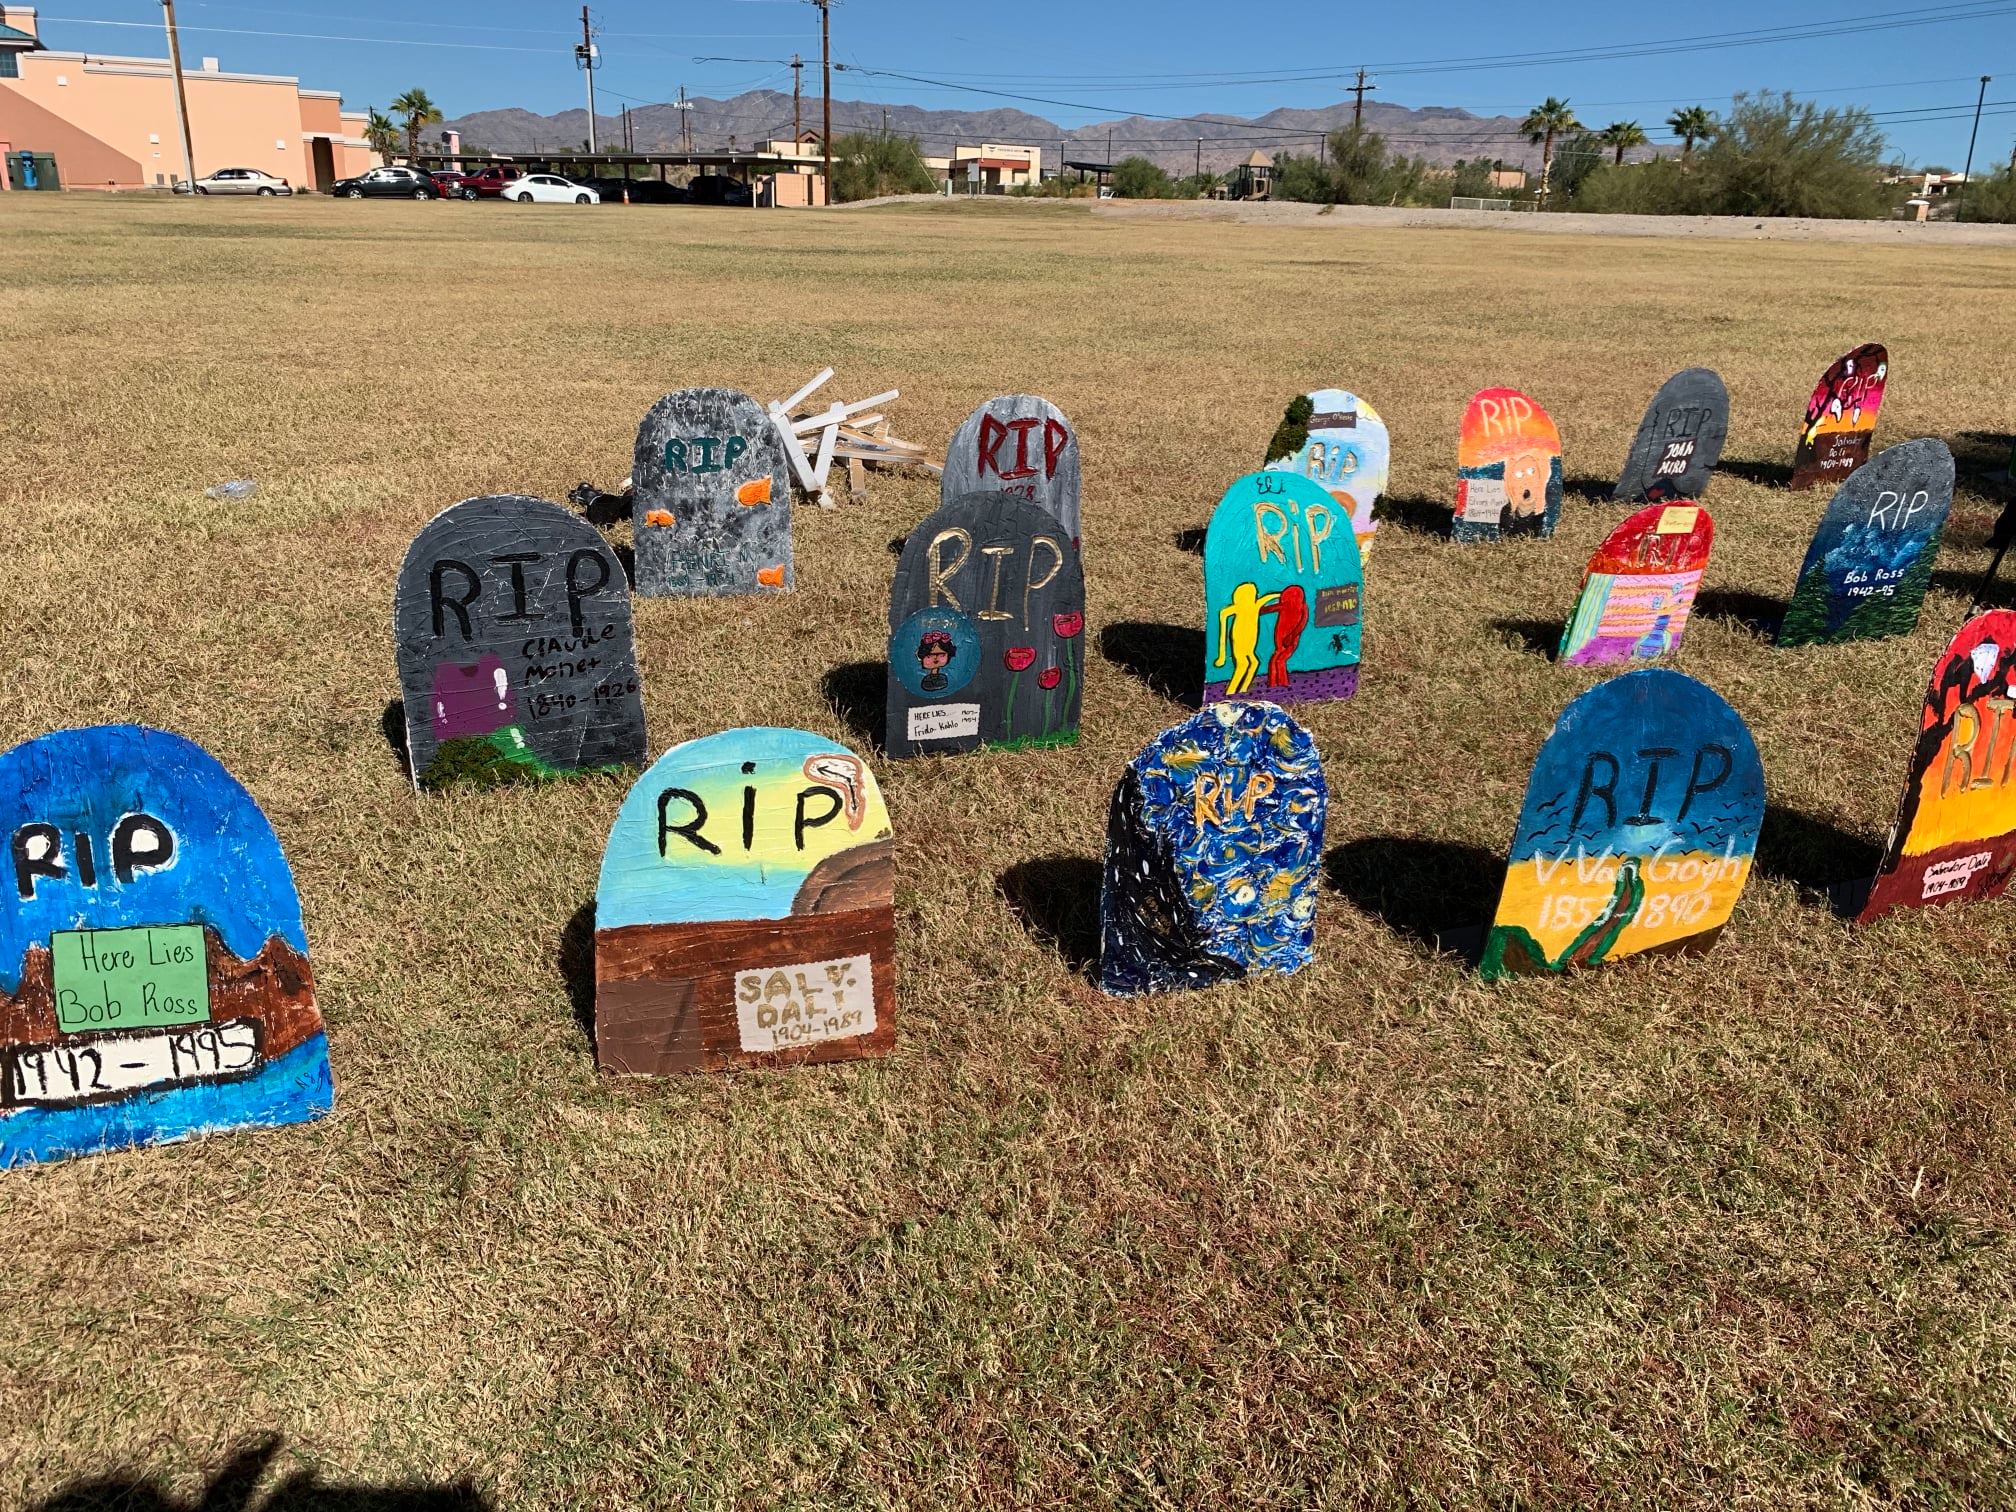 Halloween Isn’t Complete Without A Spooky Graveyard